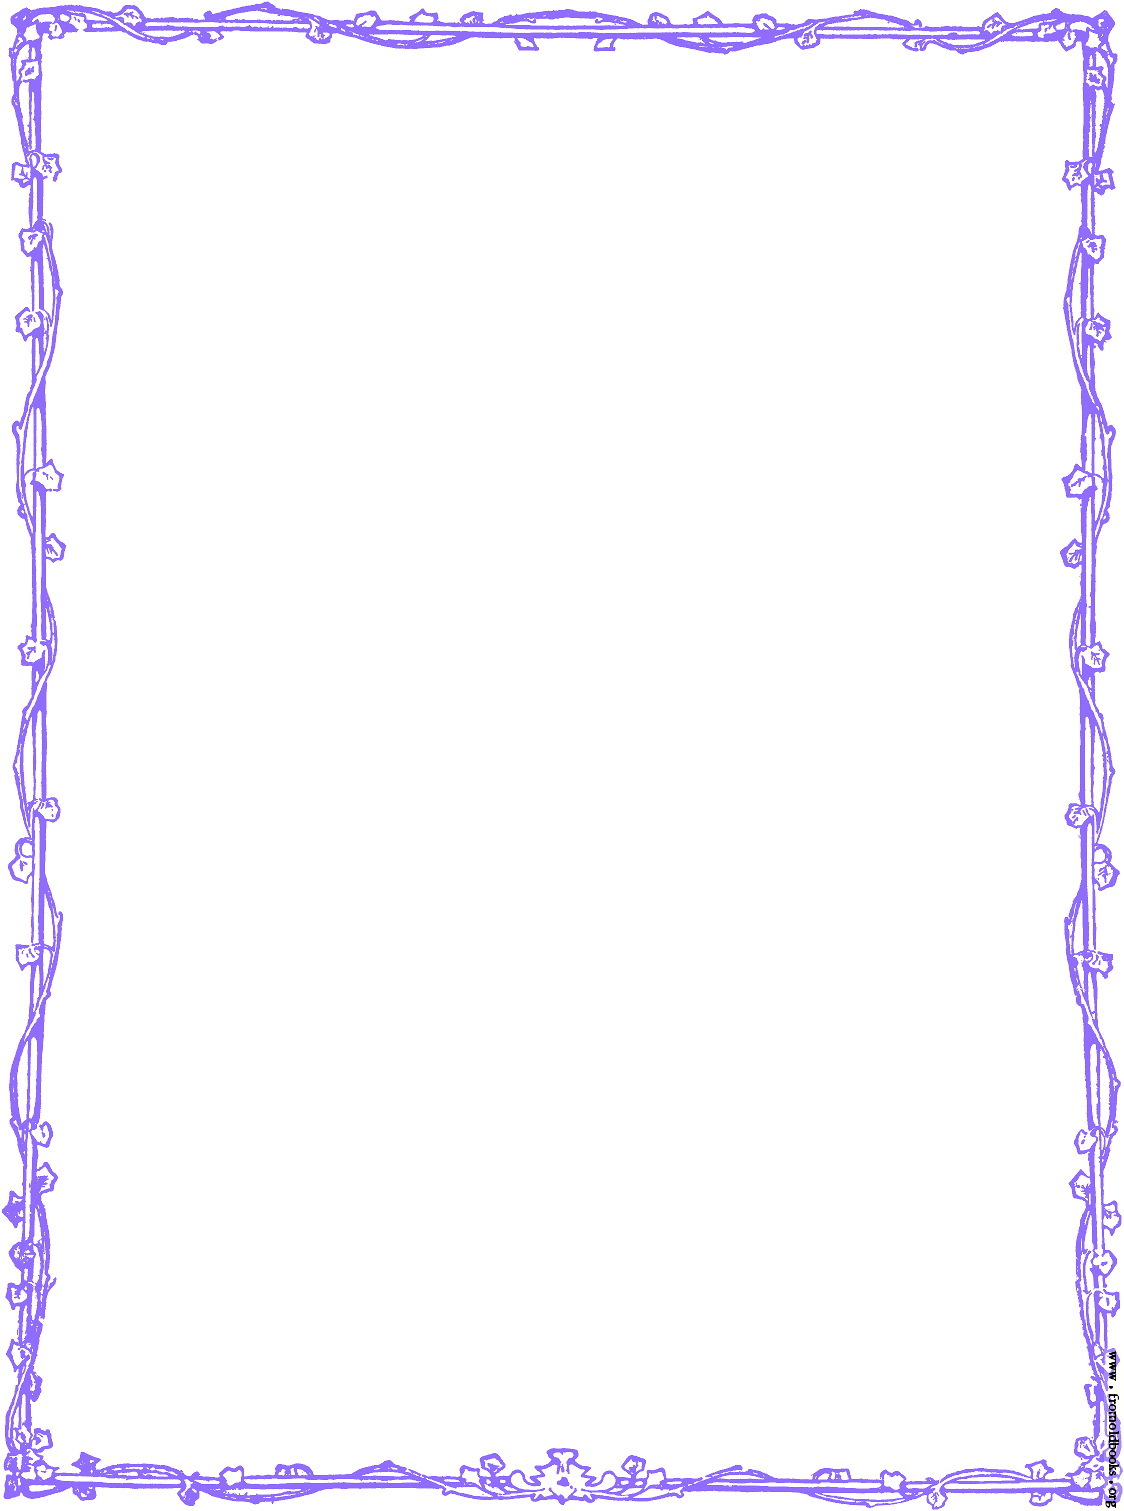 Free Download Page Borders - ClipArt Best